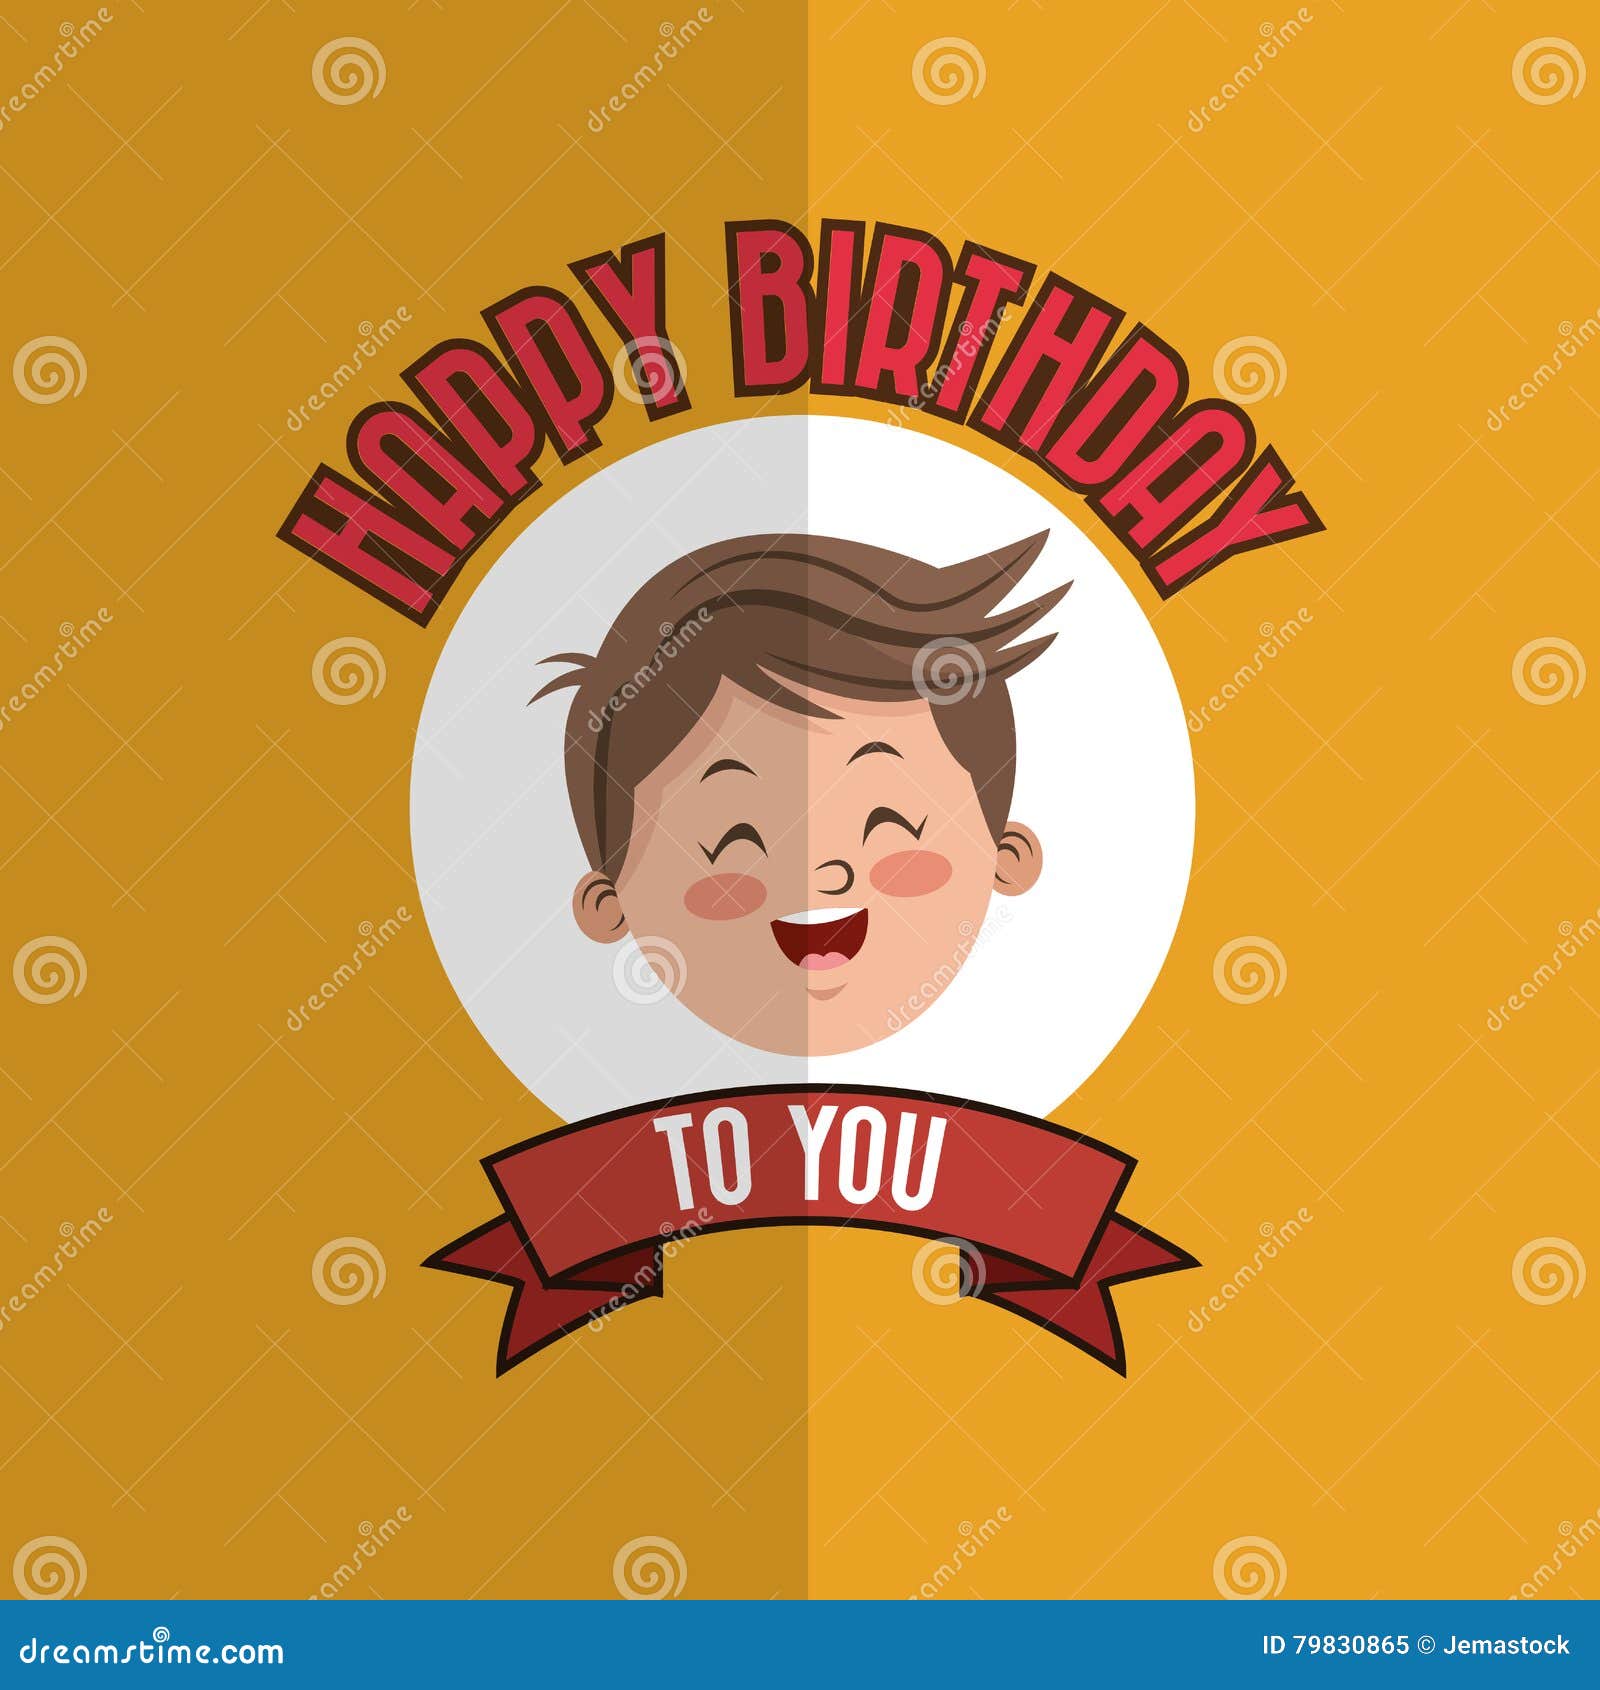 Child with Happy Birthday Related Icons Image Stock Illustration ...